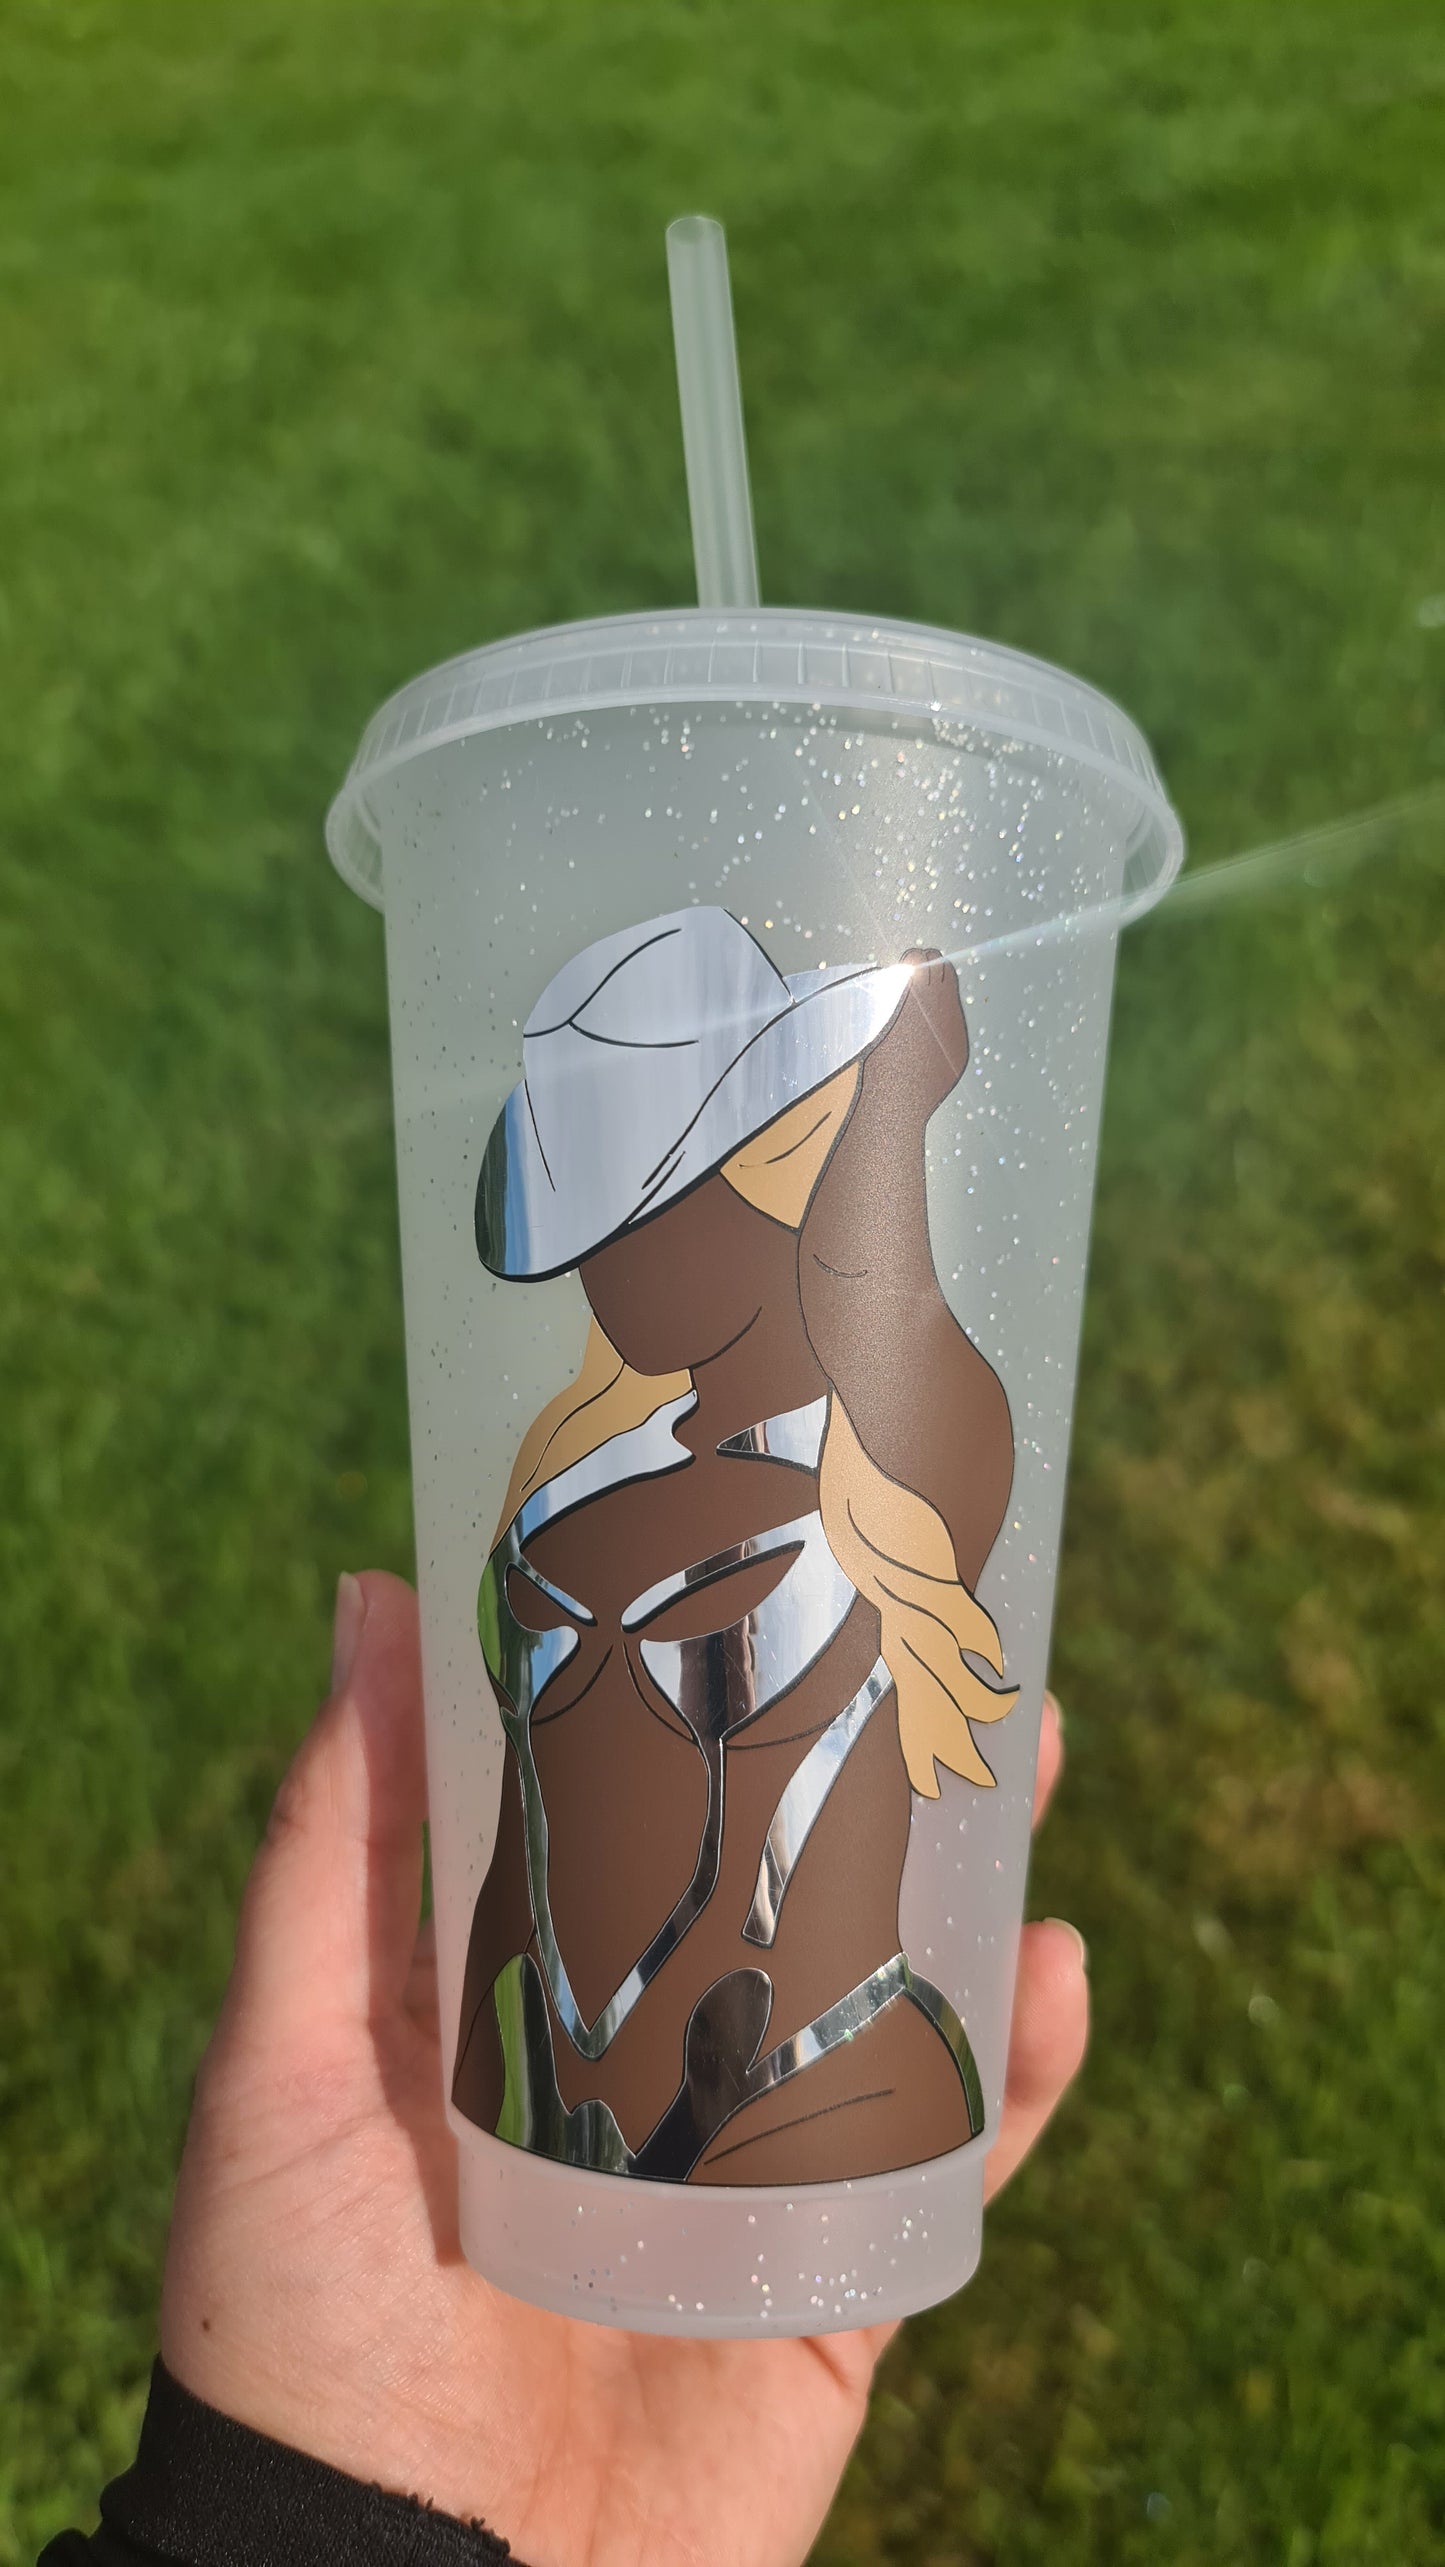 Beyonce Concert Cup 24oz Cold Cup / Starbucks Glitter Custom Tumbler Cup / Personalised Music Concert Tickets, Reusable Cup Straw and Lid